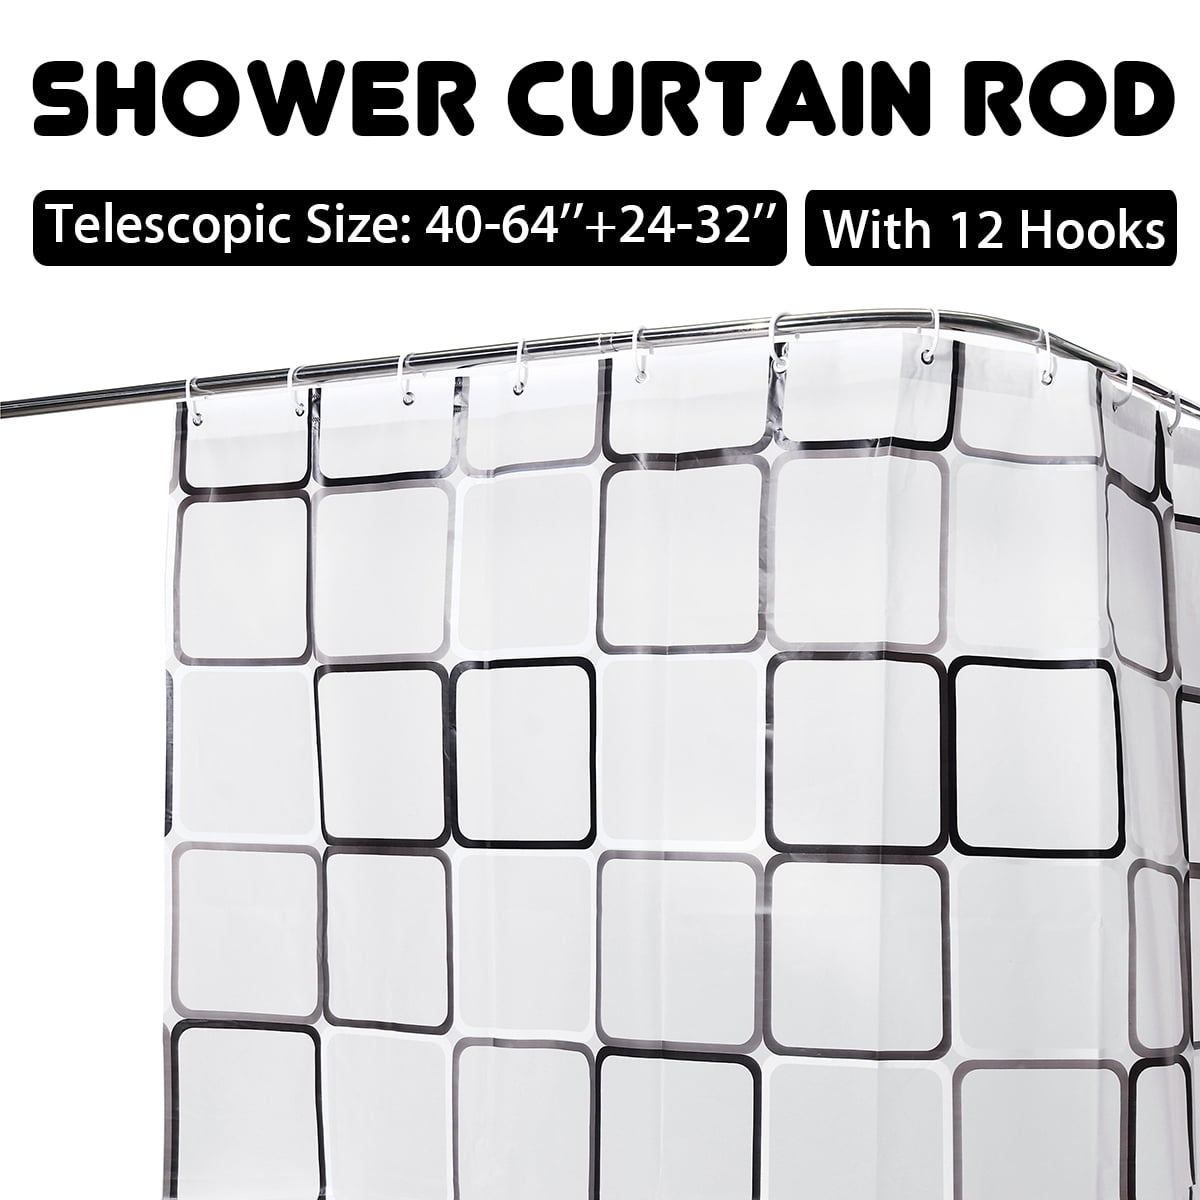 Details about   Stainless Steel Extendable Telescopic Shower Curtain Pole Rod Bath Doo iy v 